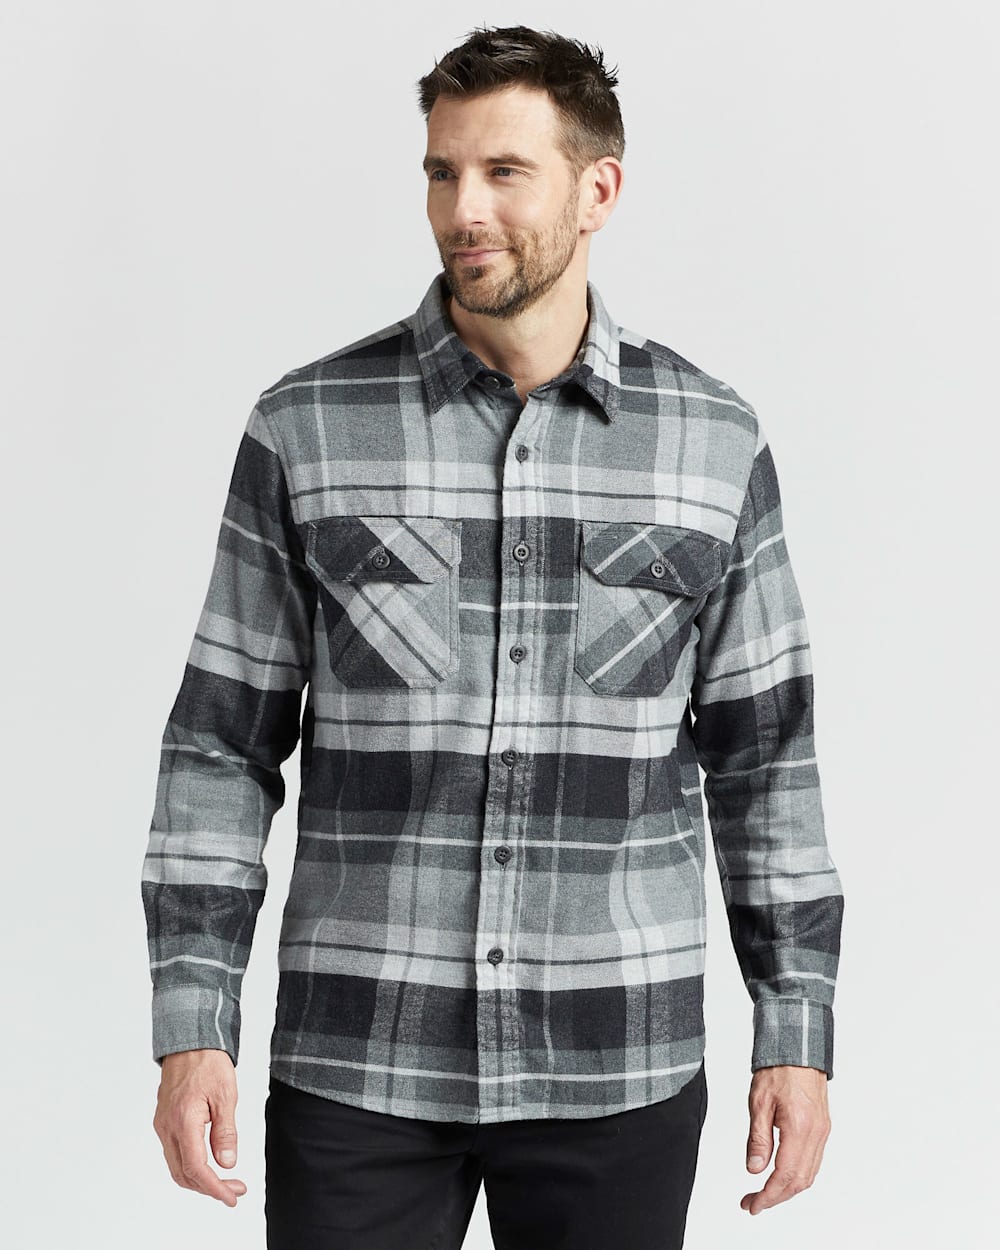 MEN'S PLAID BURNSIDE DOUBLE-BRUSHED FLANNEL SHIRT IN GREY PLAID image number 1